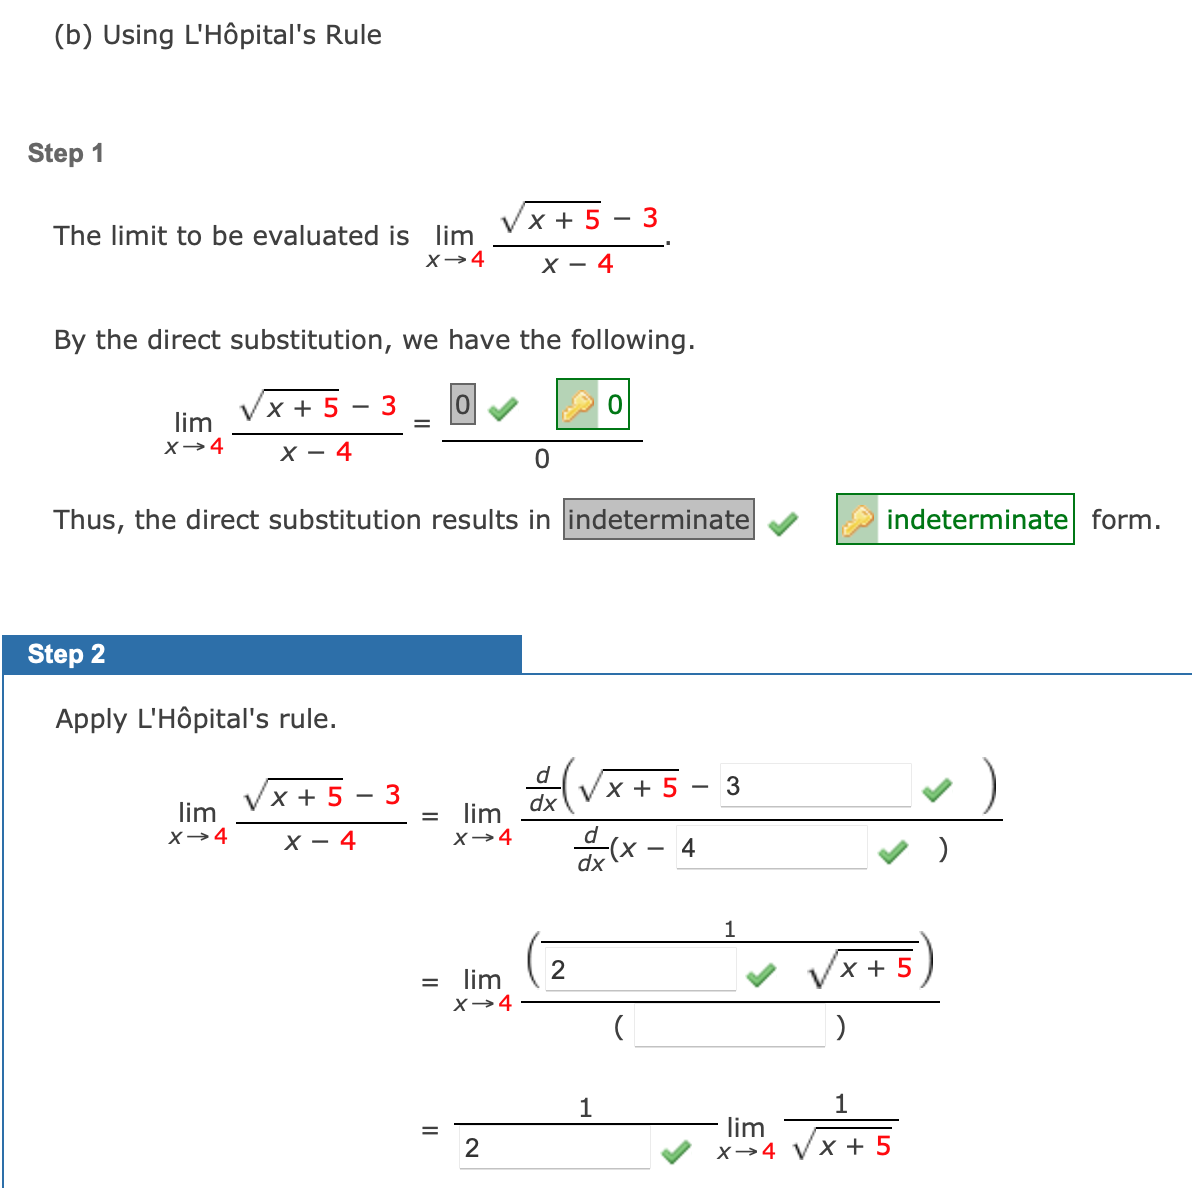 (b) Using L'Hôpital's Rule
Step 1
X + 5
3
The limit to be evaluated is lim
X→4
х — 4
By the direct substitution, we have the following.
Vx + 5
lim
3
X→4
X - 4
Thus, the direct substitution results in indeterminate
indeterminate form.
Step 2
Apply L'Hôpital's rule.
(Vx +5 - 3
d
Vx + 5
3
dx
lim
X→4
lim
х — 4
X→4
d
4
dx (X
x + 5
= lim
X→4
1
1
lim
X→4 VX + 5
2
